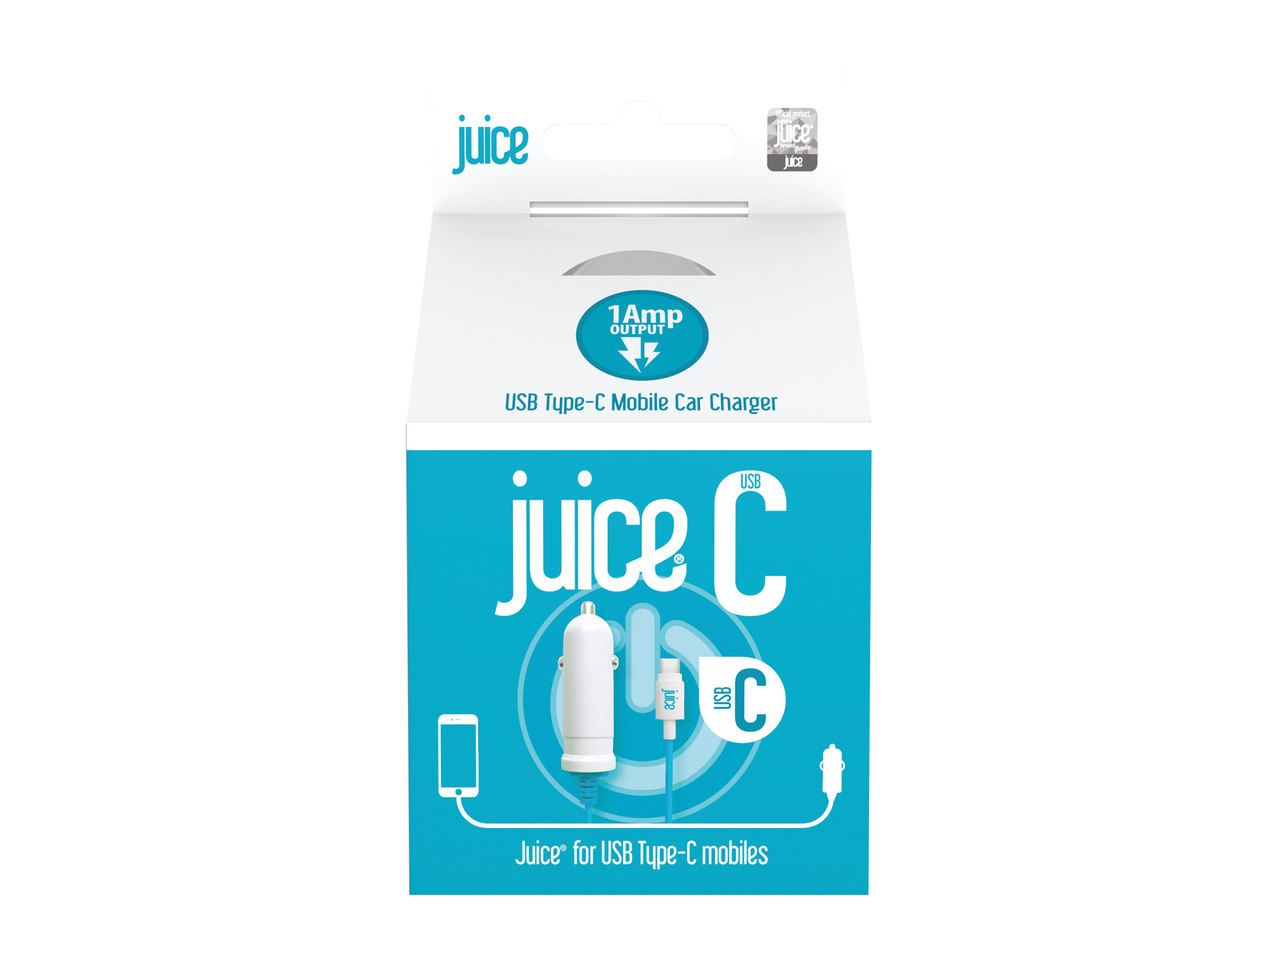 Juice Charger or Cable1